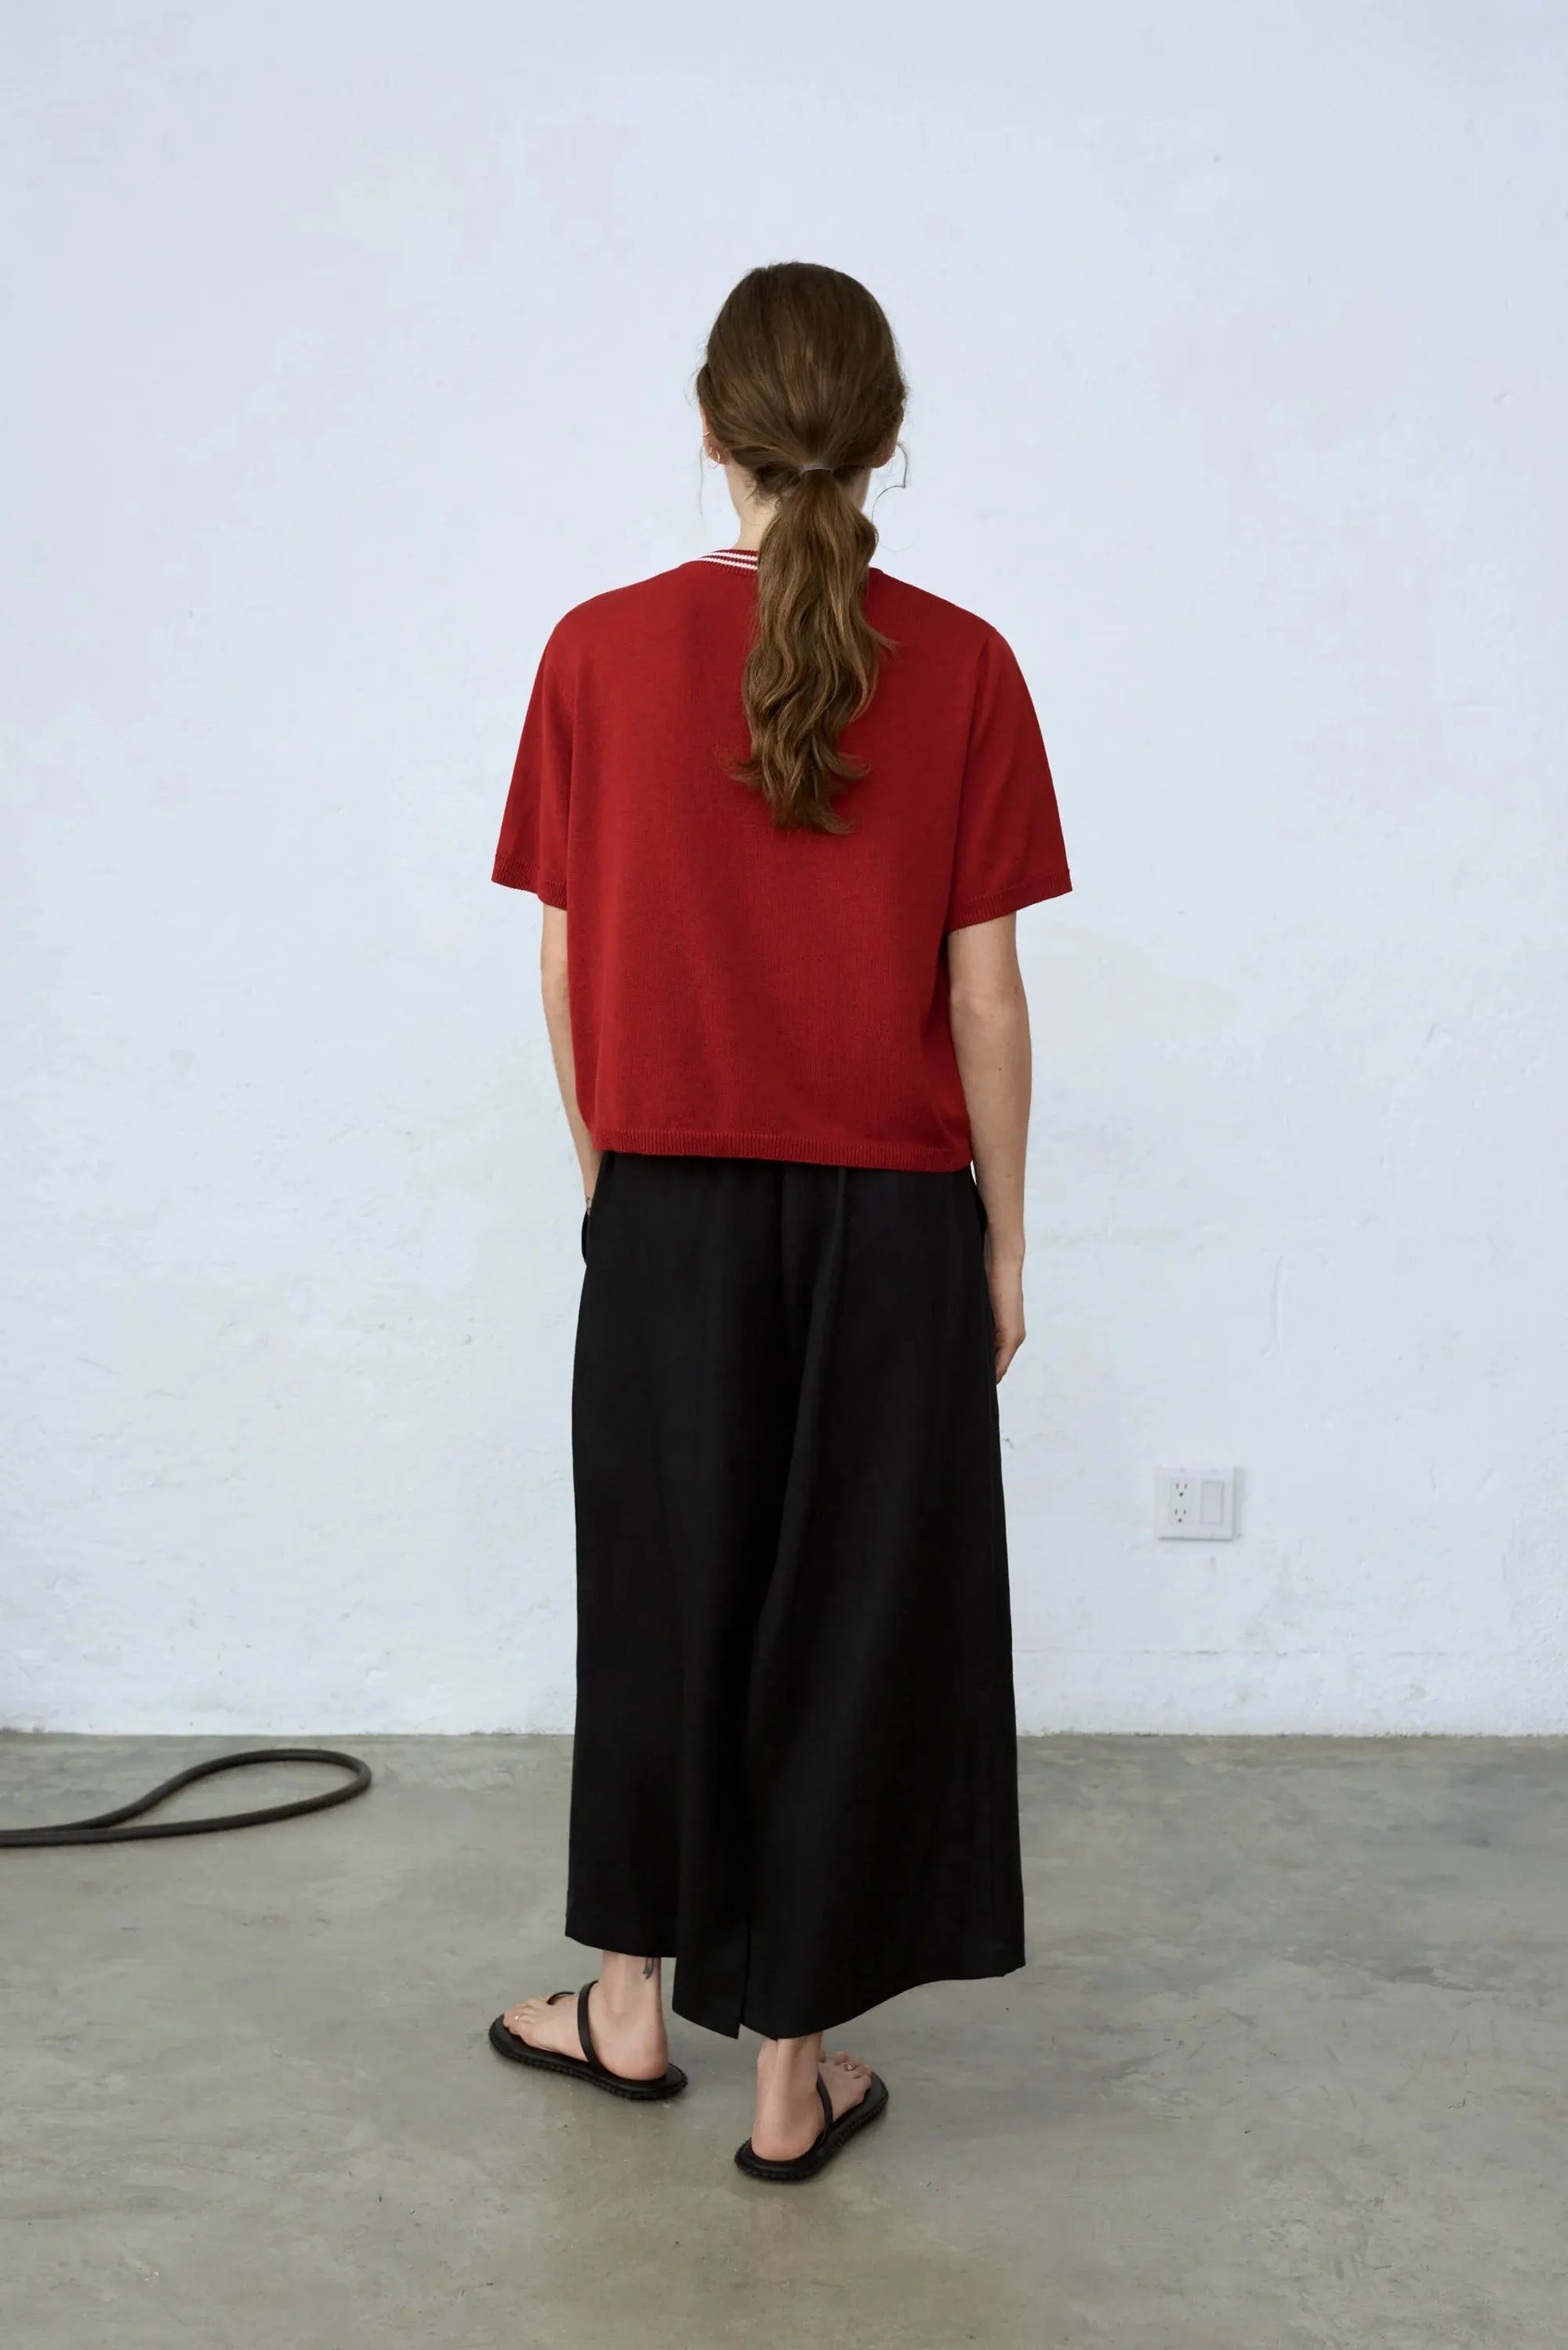 A red Silk Logo Top Red with a ribbed neckline, featuring a small white text logo on the left chest. The neckline has white striped detailing, and there are additional small stitched details near the shoulders. Available exclusively on BassalStore from Cordera, it's perfect for your next trip to Barcelona.